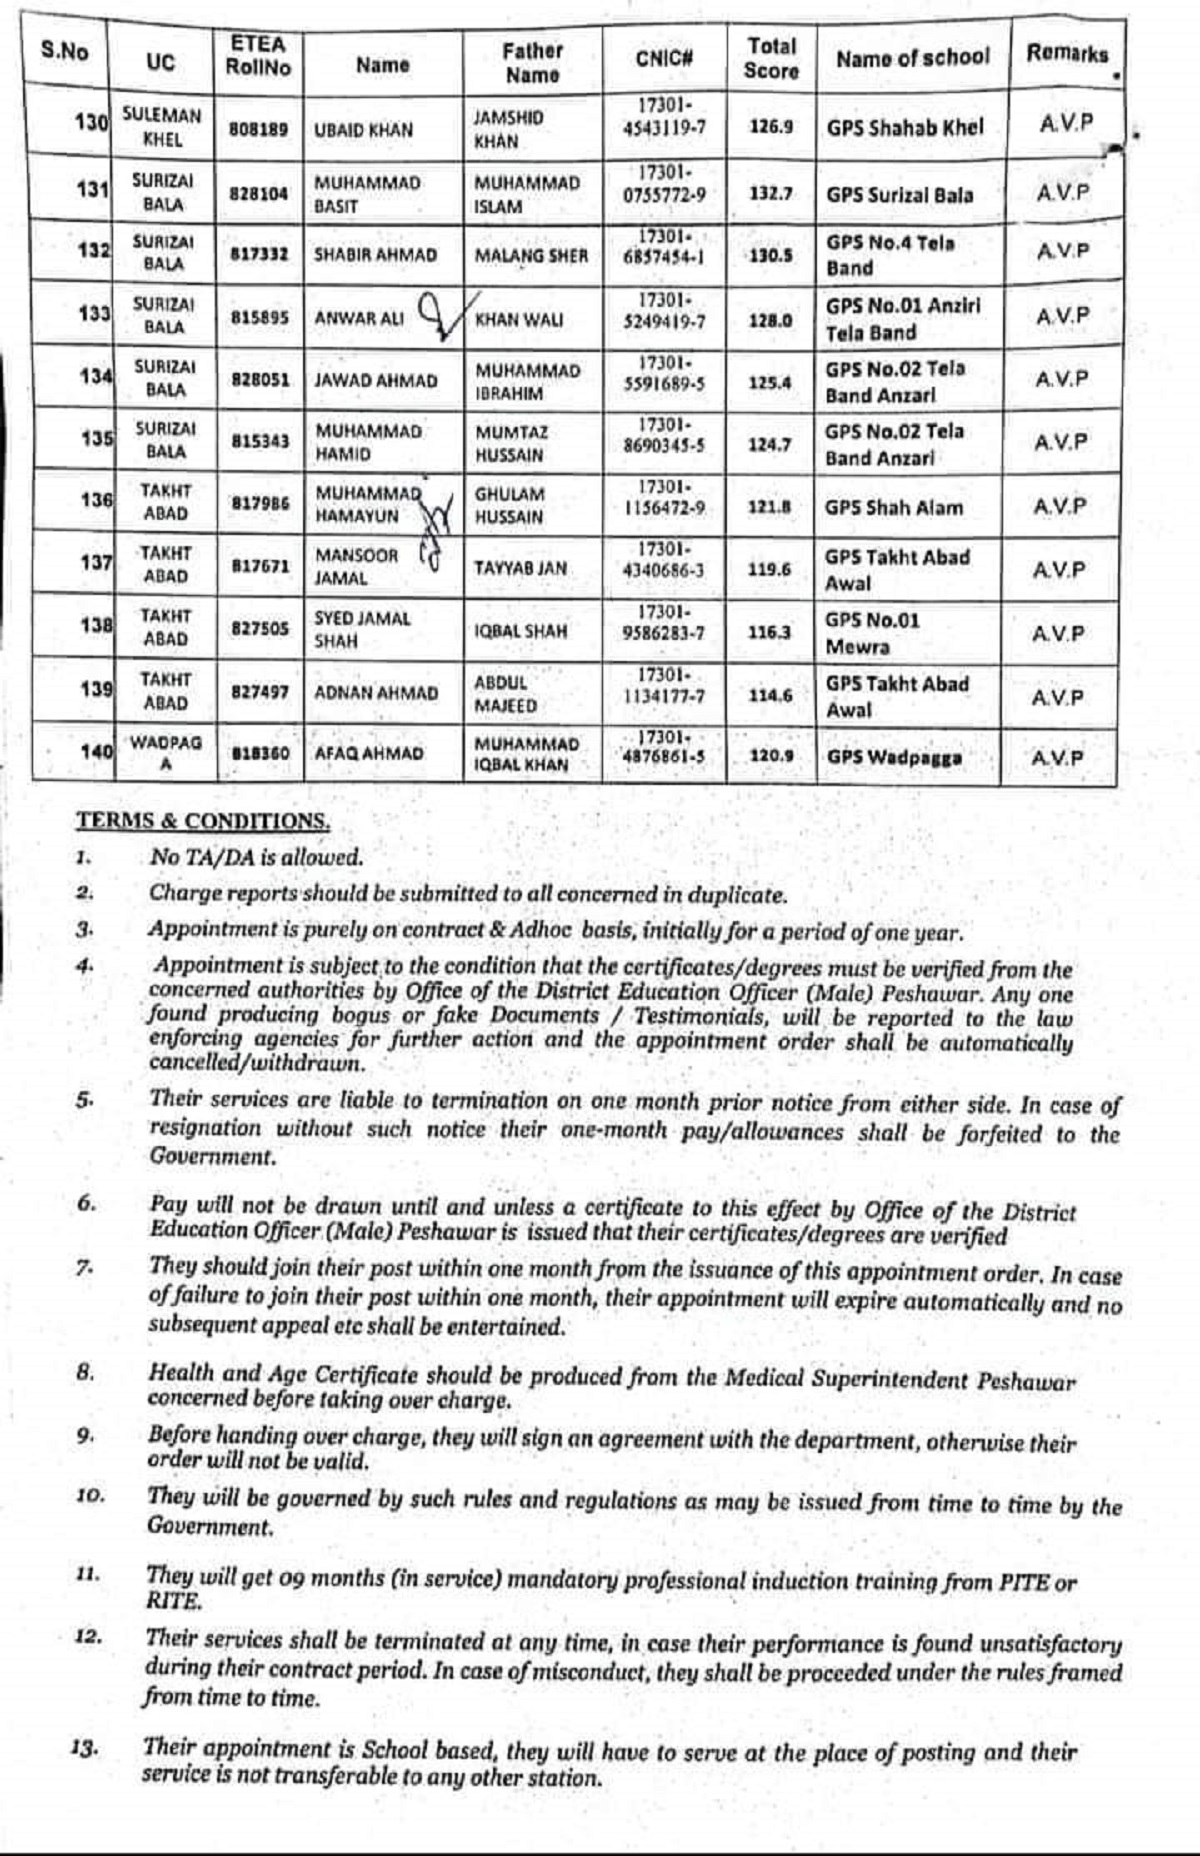 Appointment of PST(Male) Teachers in Peshawar Sep. 2022